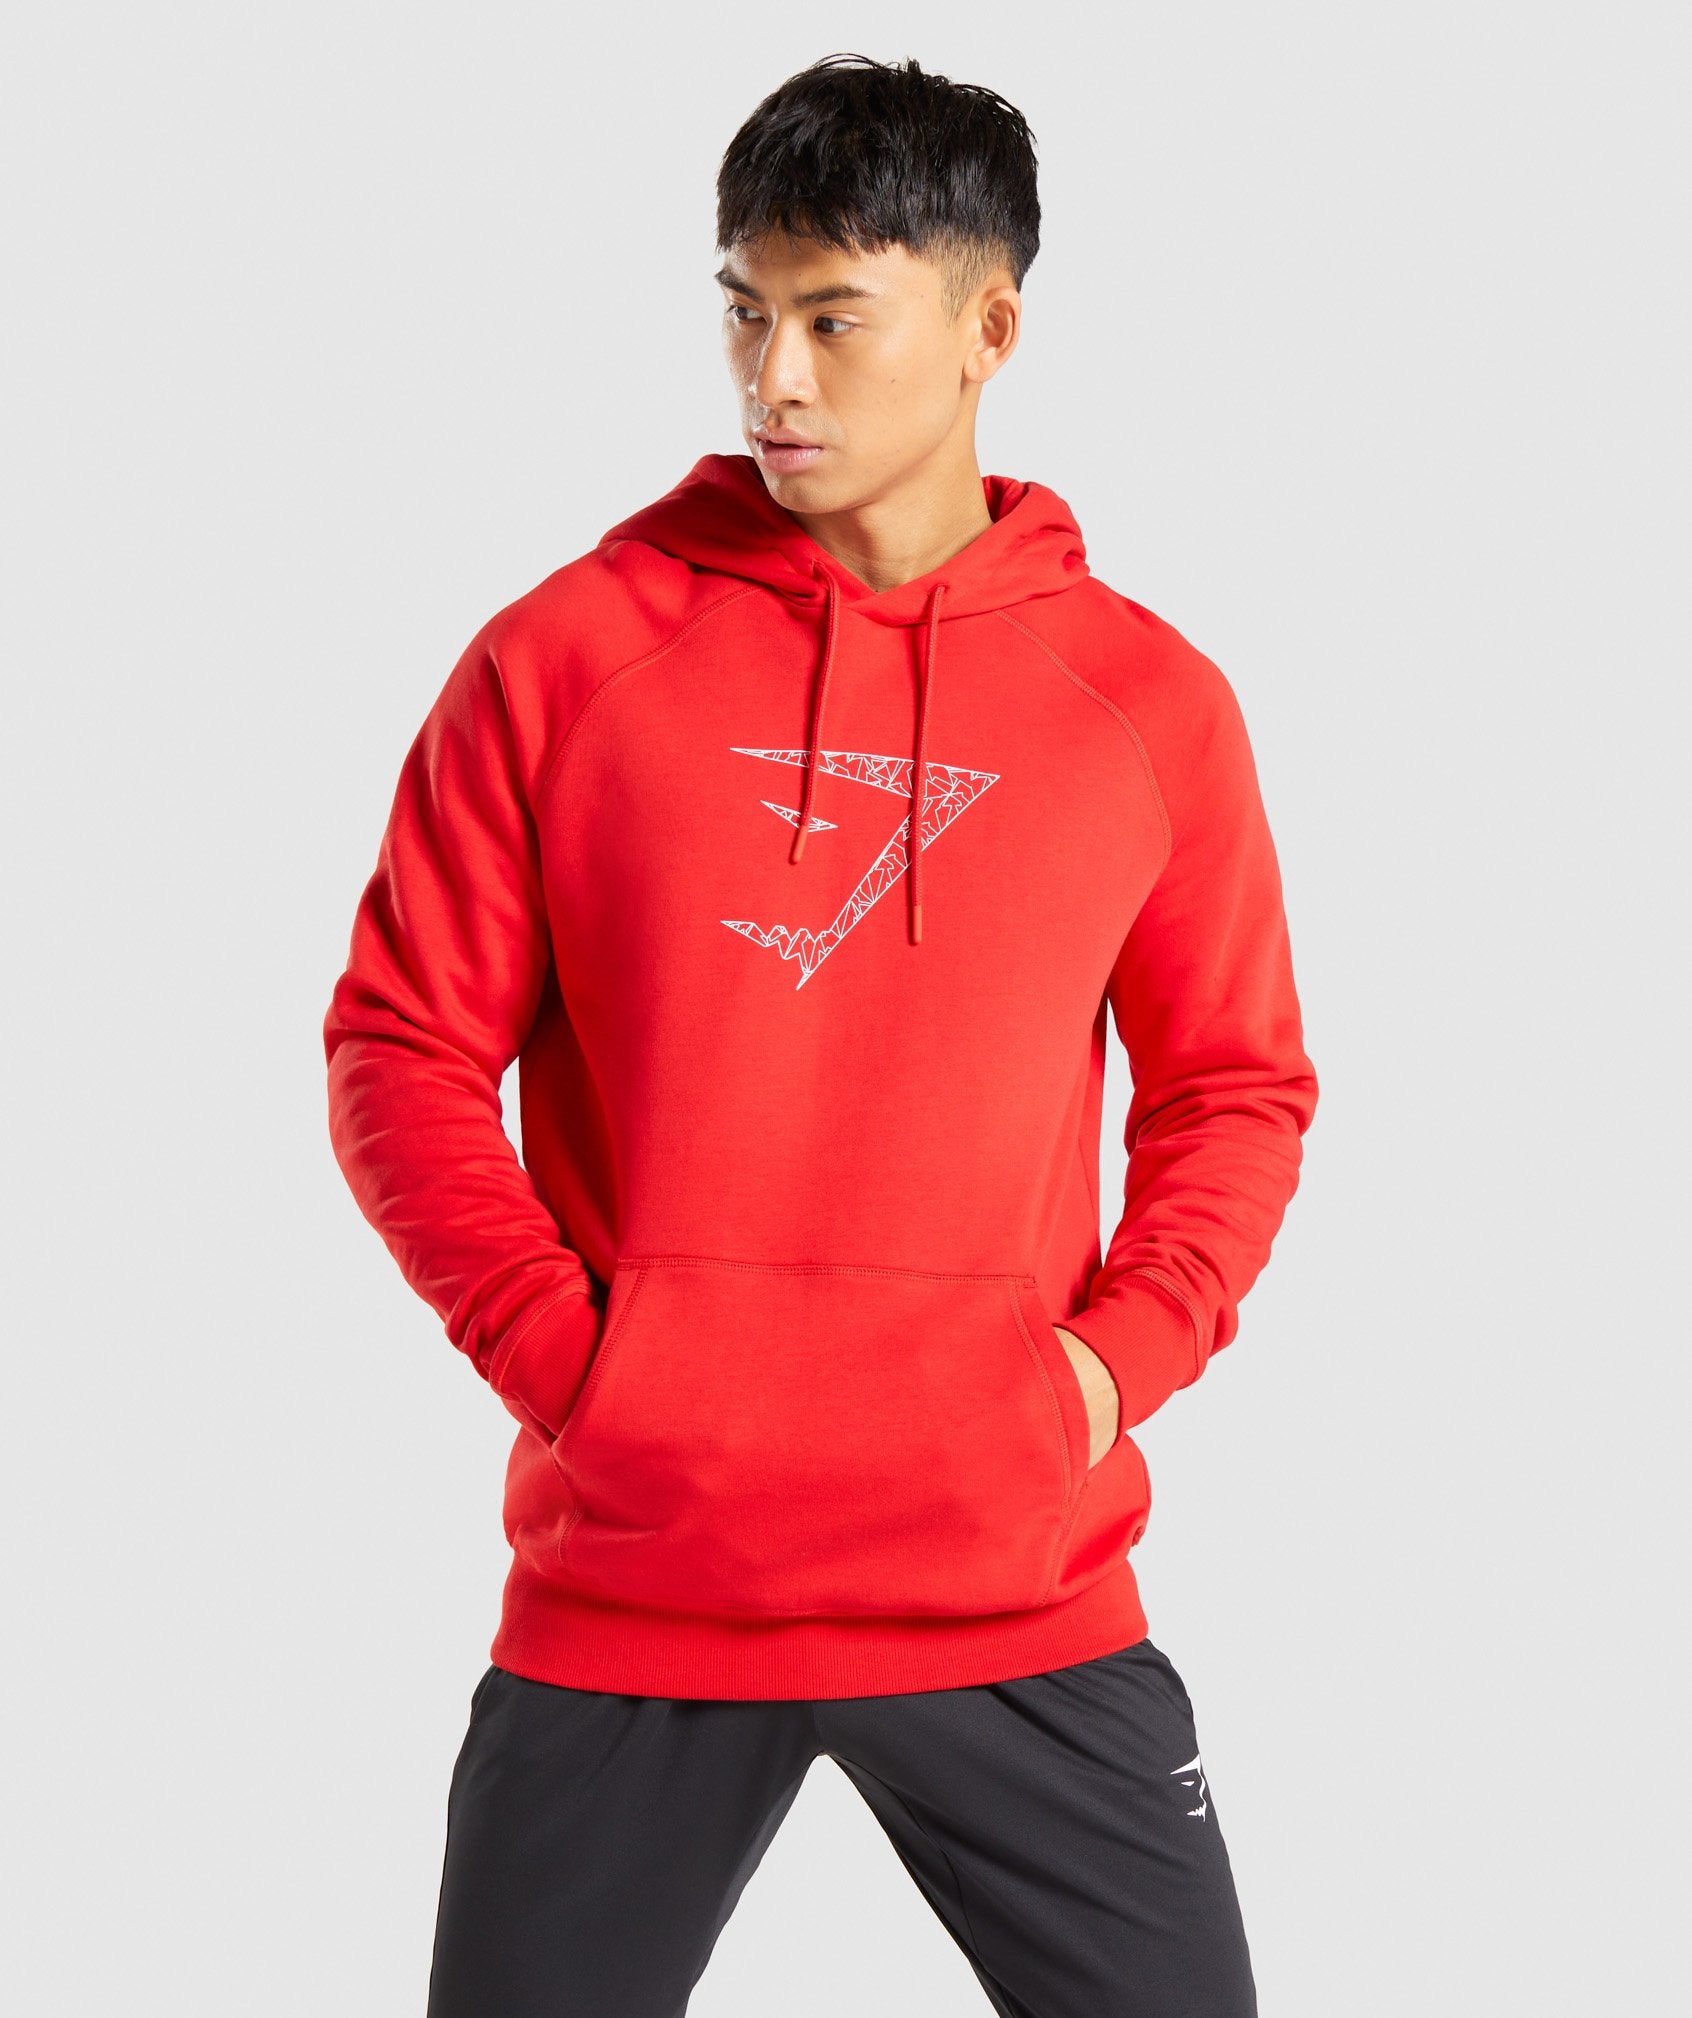 Infill Hoodie in Red - view 1